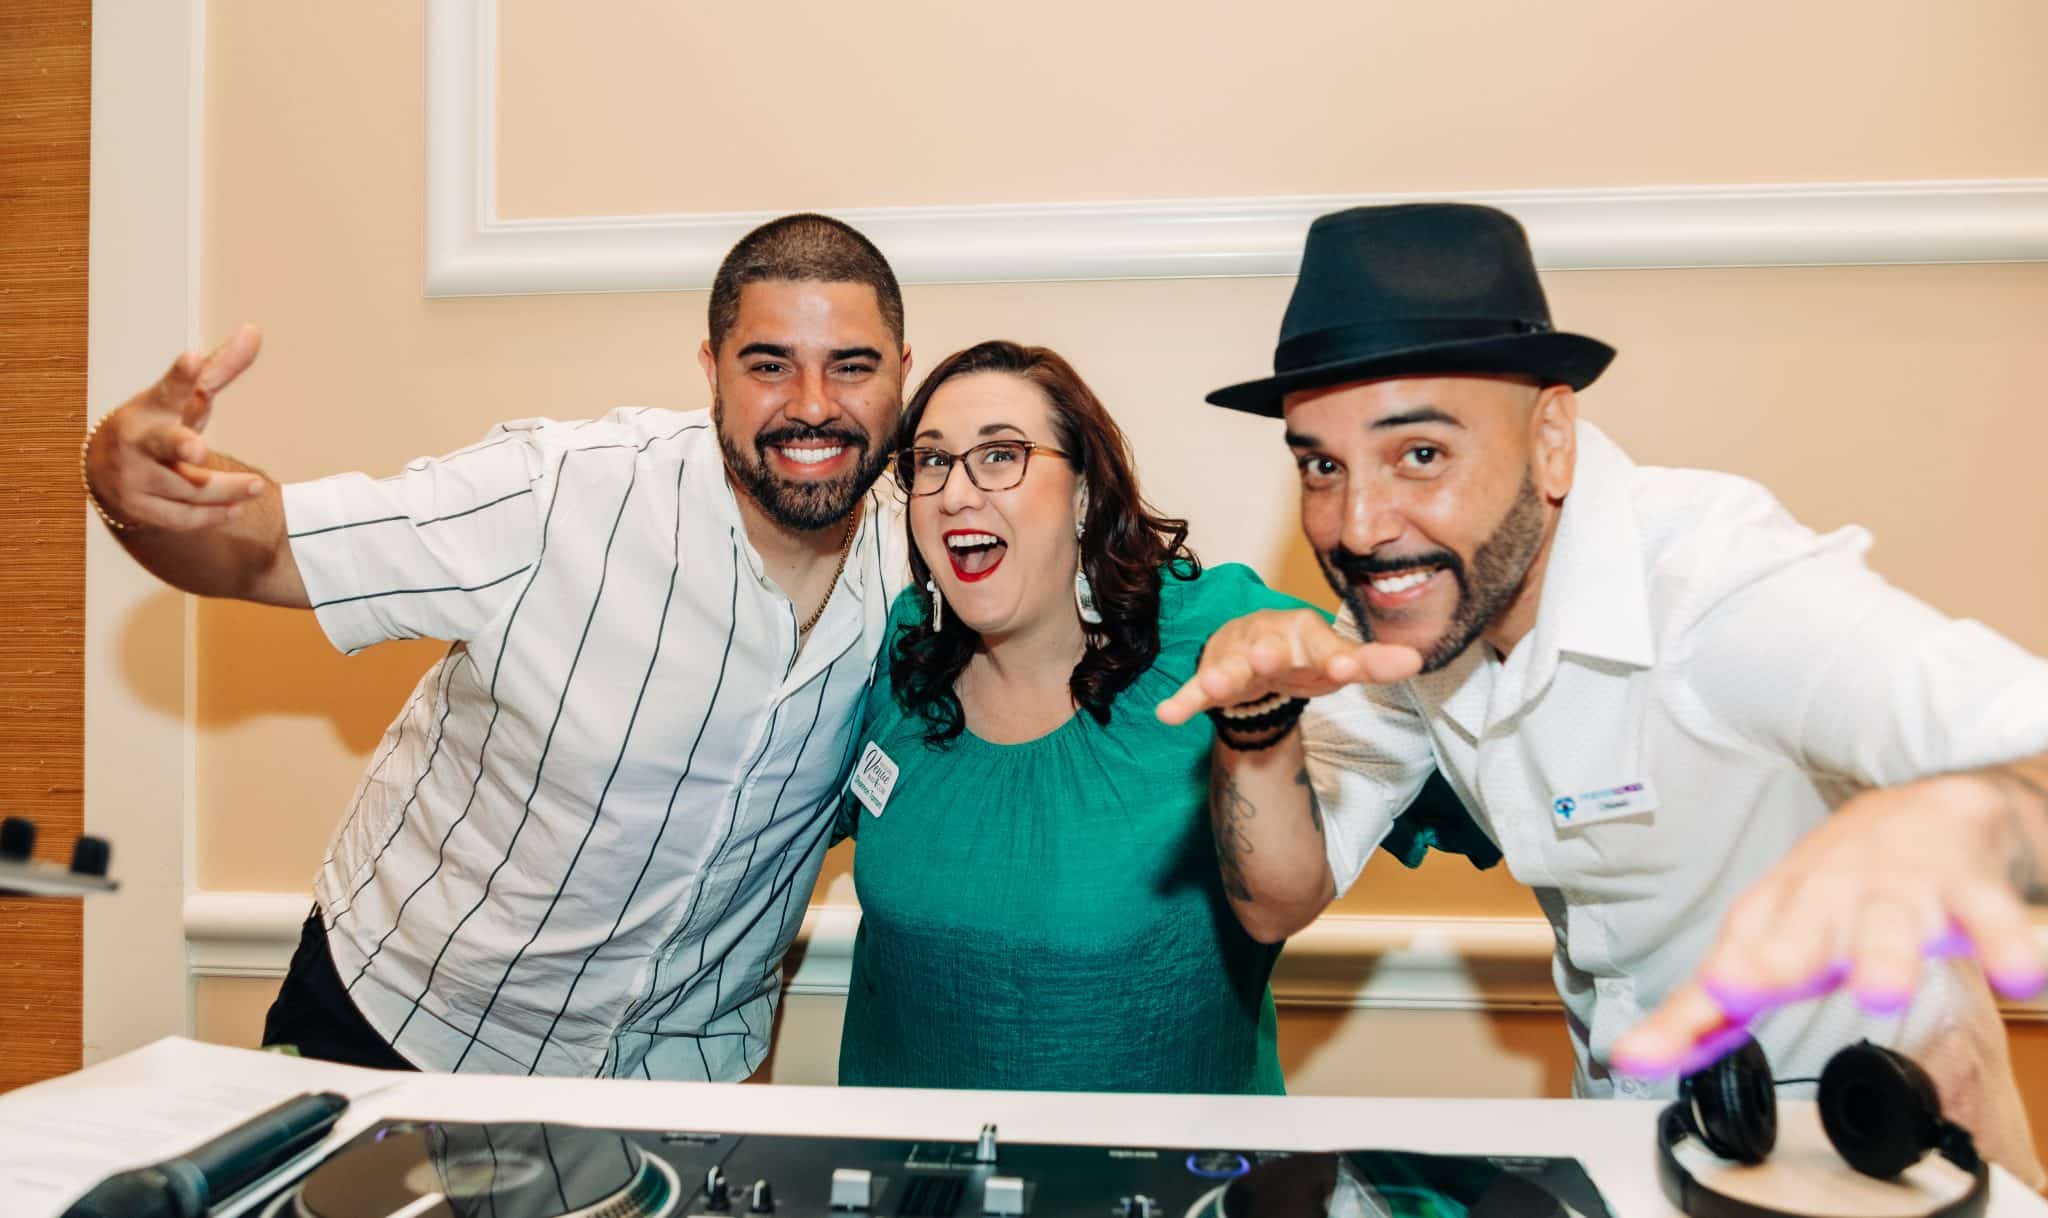 woman stands in between two djs as they stand being the dj mix table posing for a fun picture